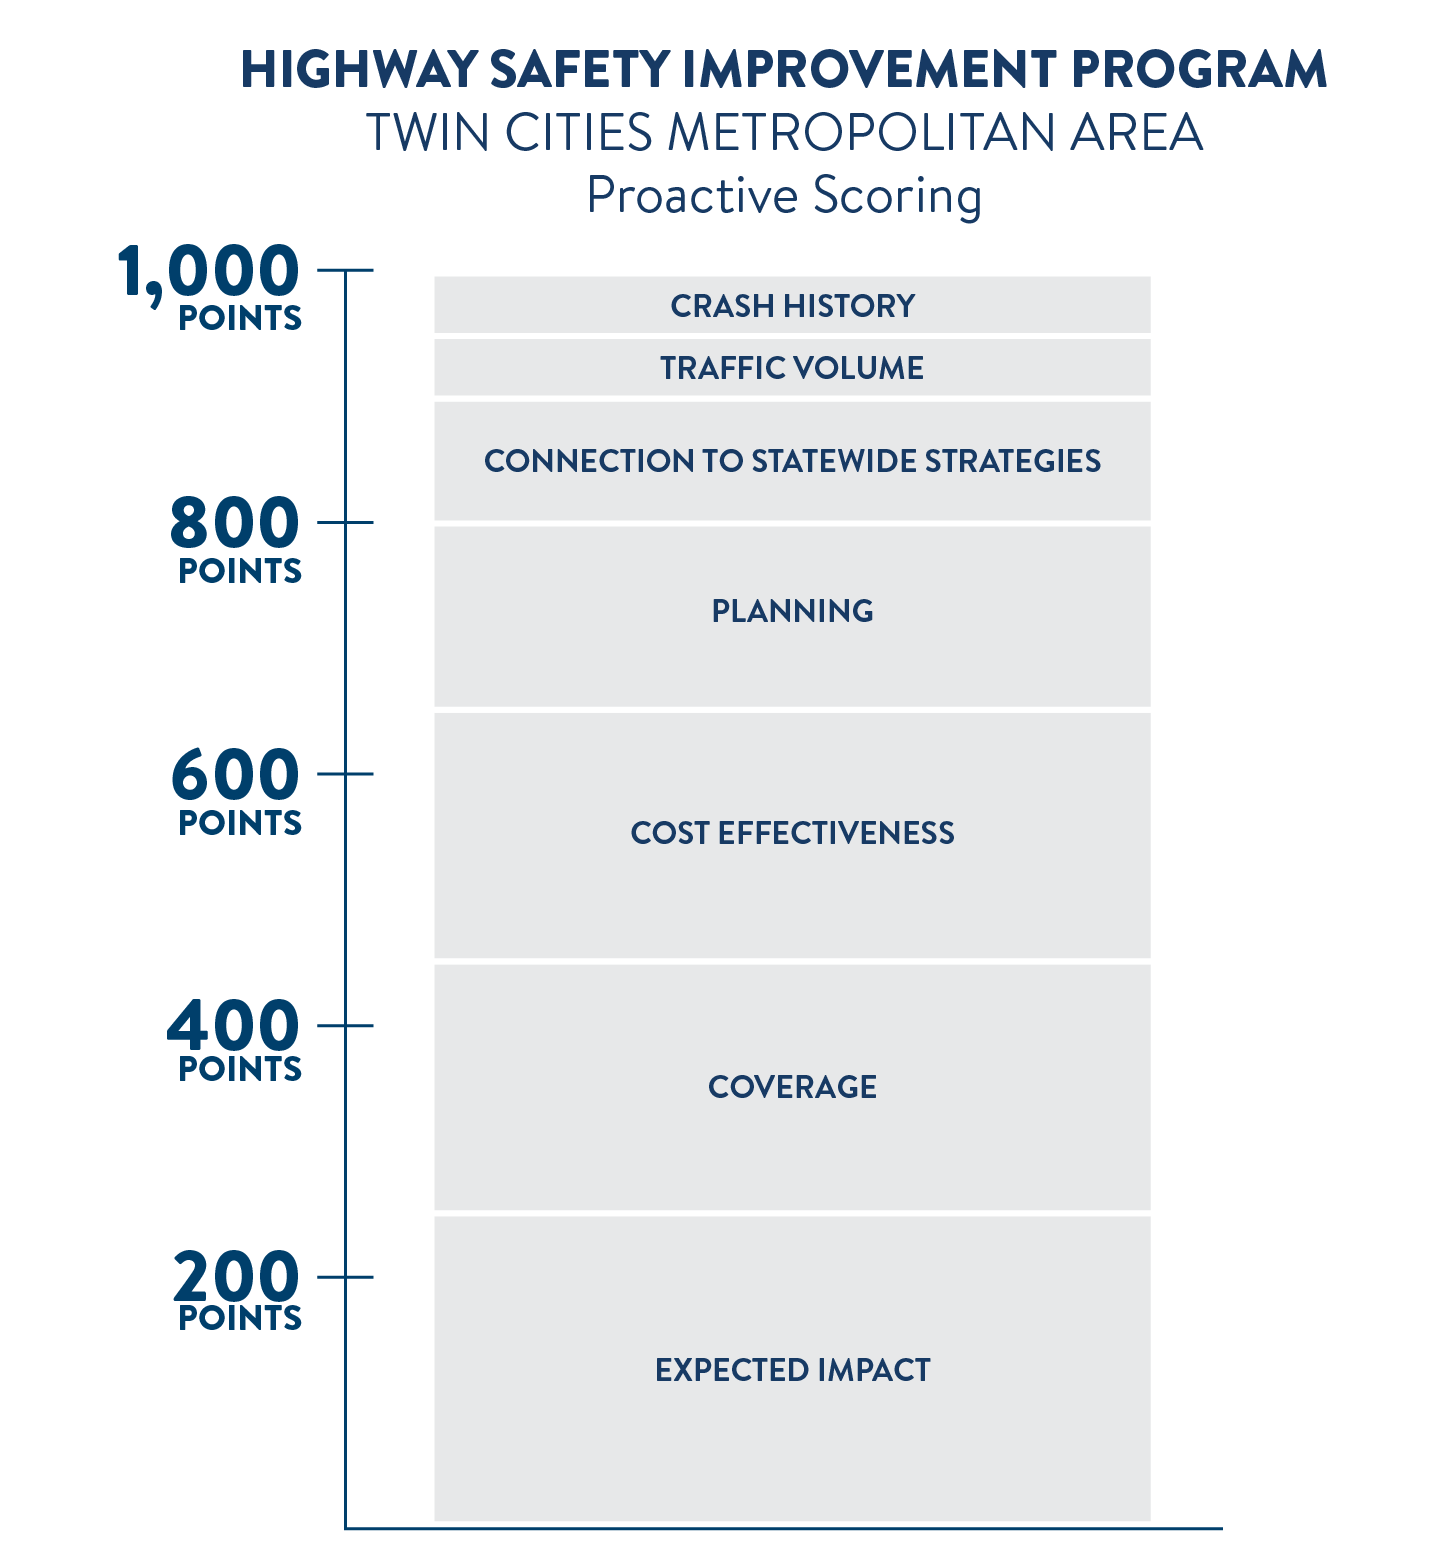 Scoring criteria for proactive safety projects in the Highway Safety Improvement Program in the Minneapolis-St. Paul metropolitan area. Out of 1,000 possible points, 250 points are based on the expected impact of the project, 200 are based on coverage, 200 are based on cost effectiveness, 150 are based on planning, 100 are based on connection to statewide strategies, 50 are based on traffic volume, and 50 are based on crash history.